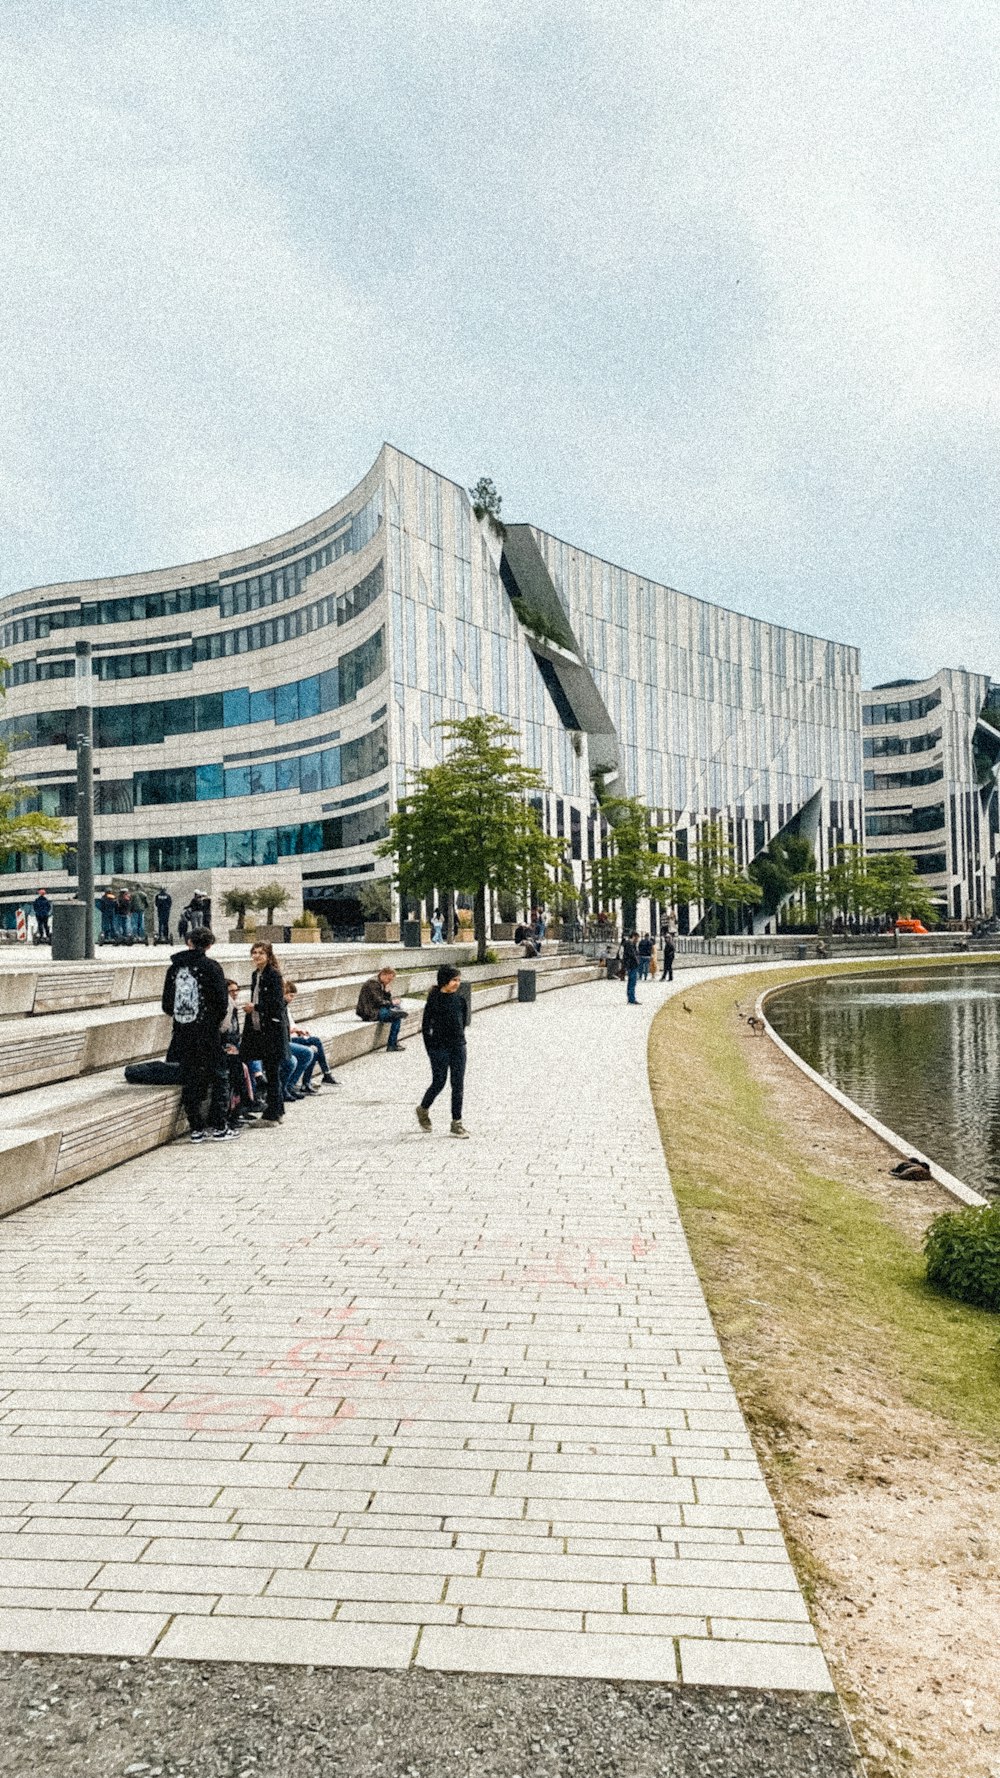 people walking on a path near a building